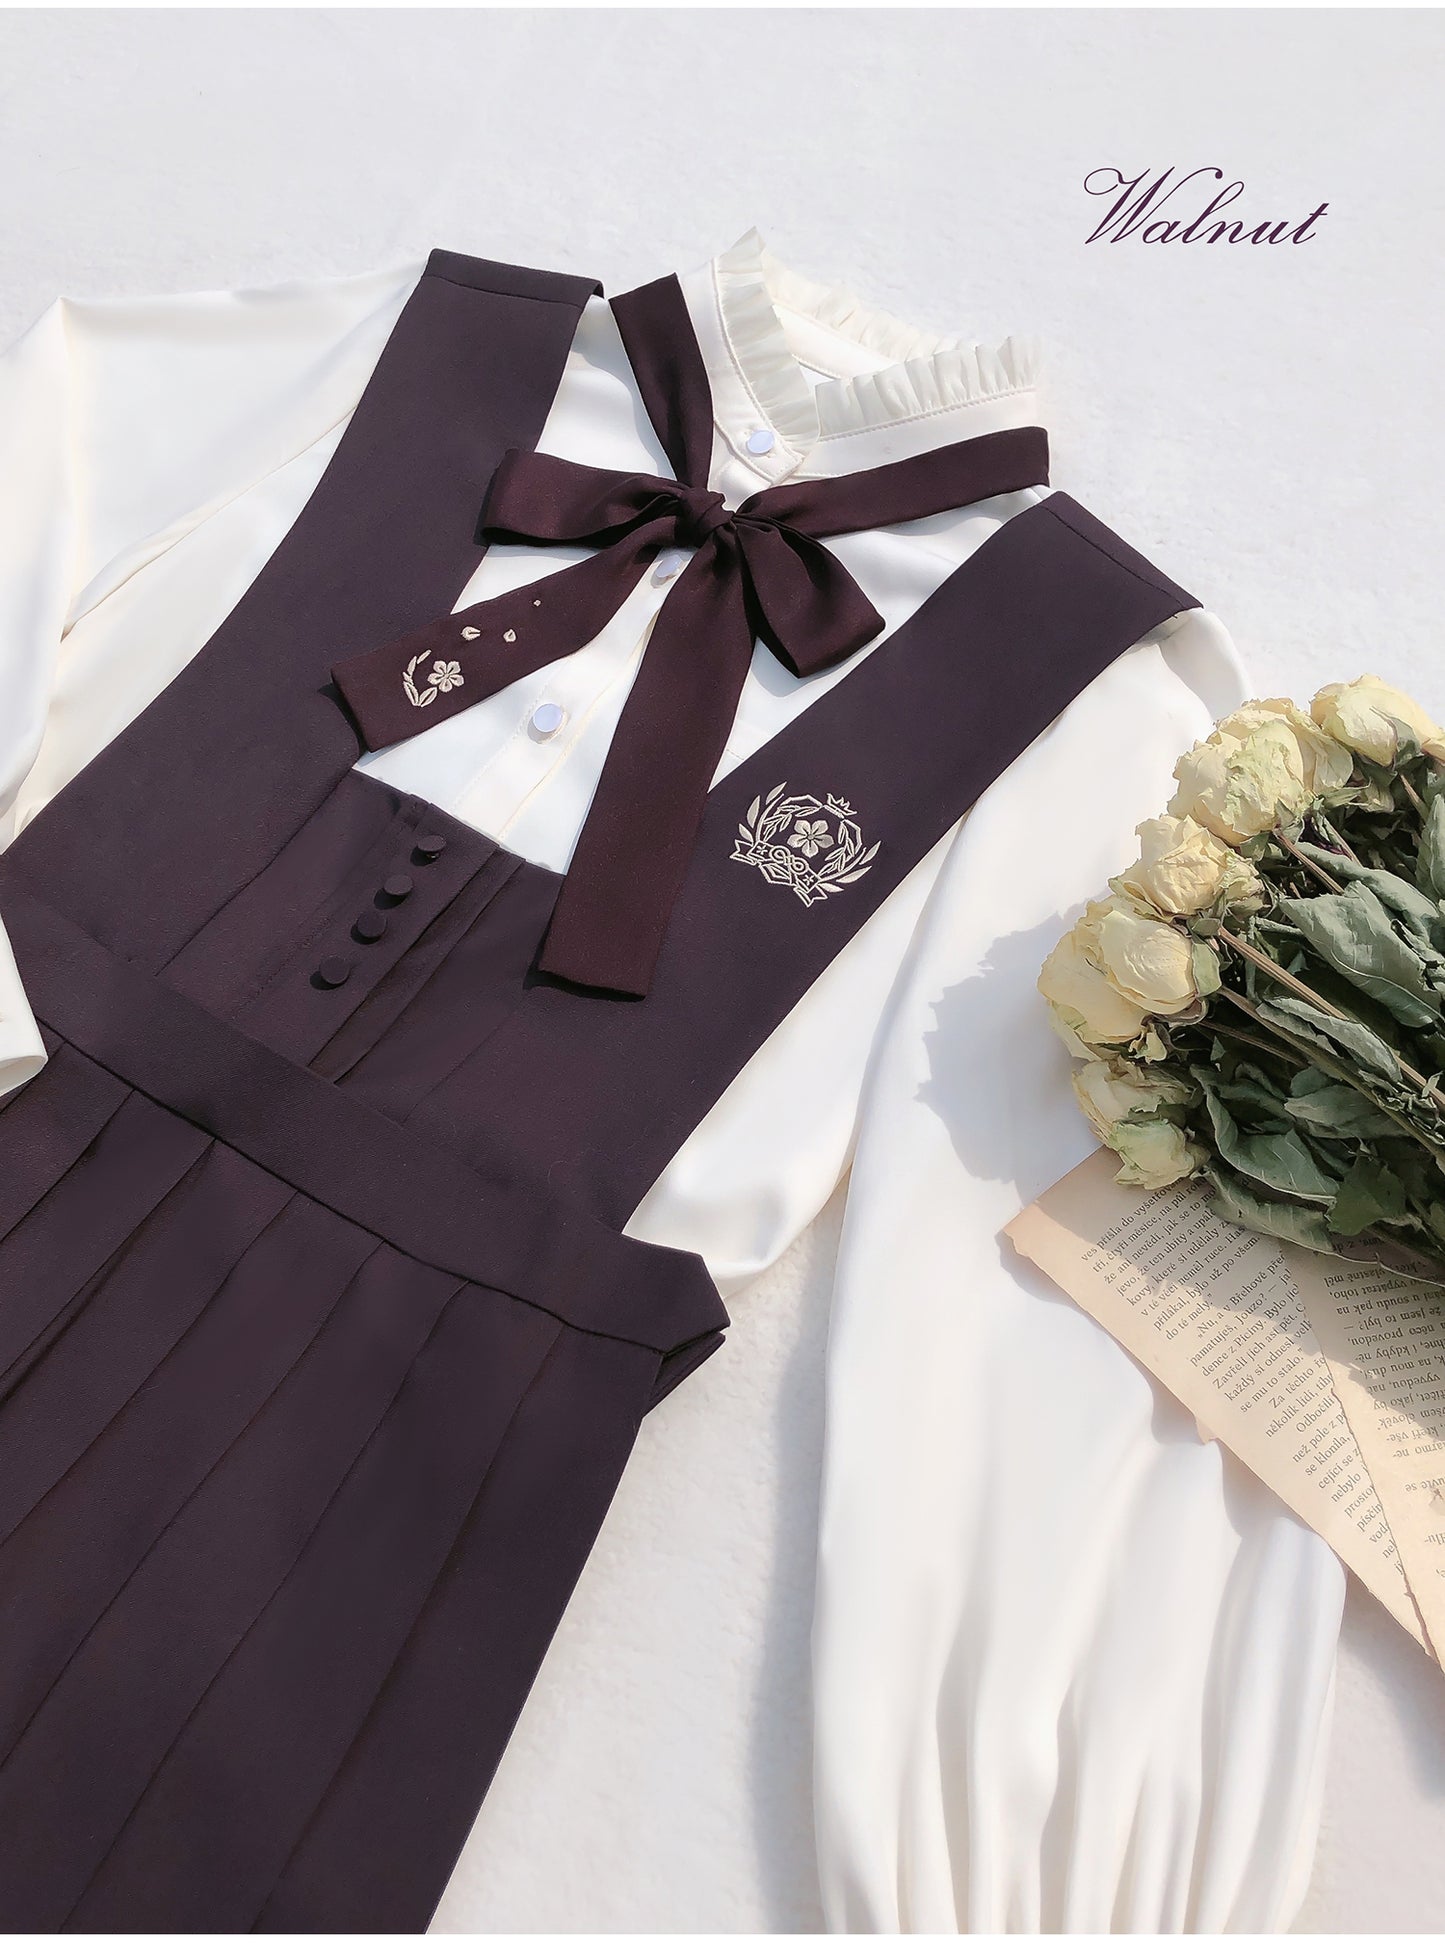 Japanese-style deep purple jumper skirt and blouse, haori, ribbon tie, corsage only